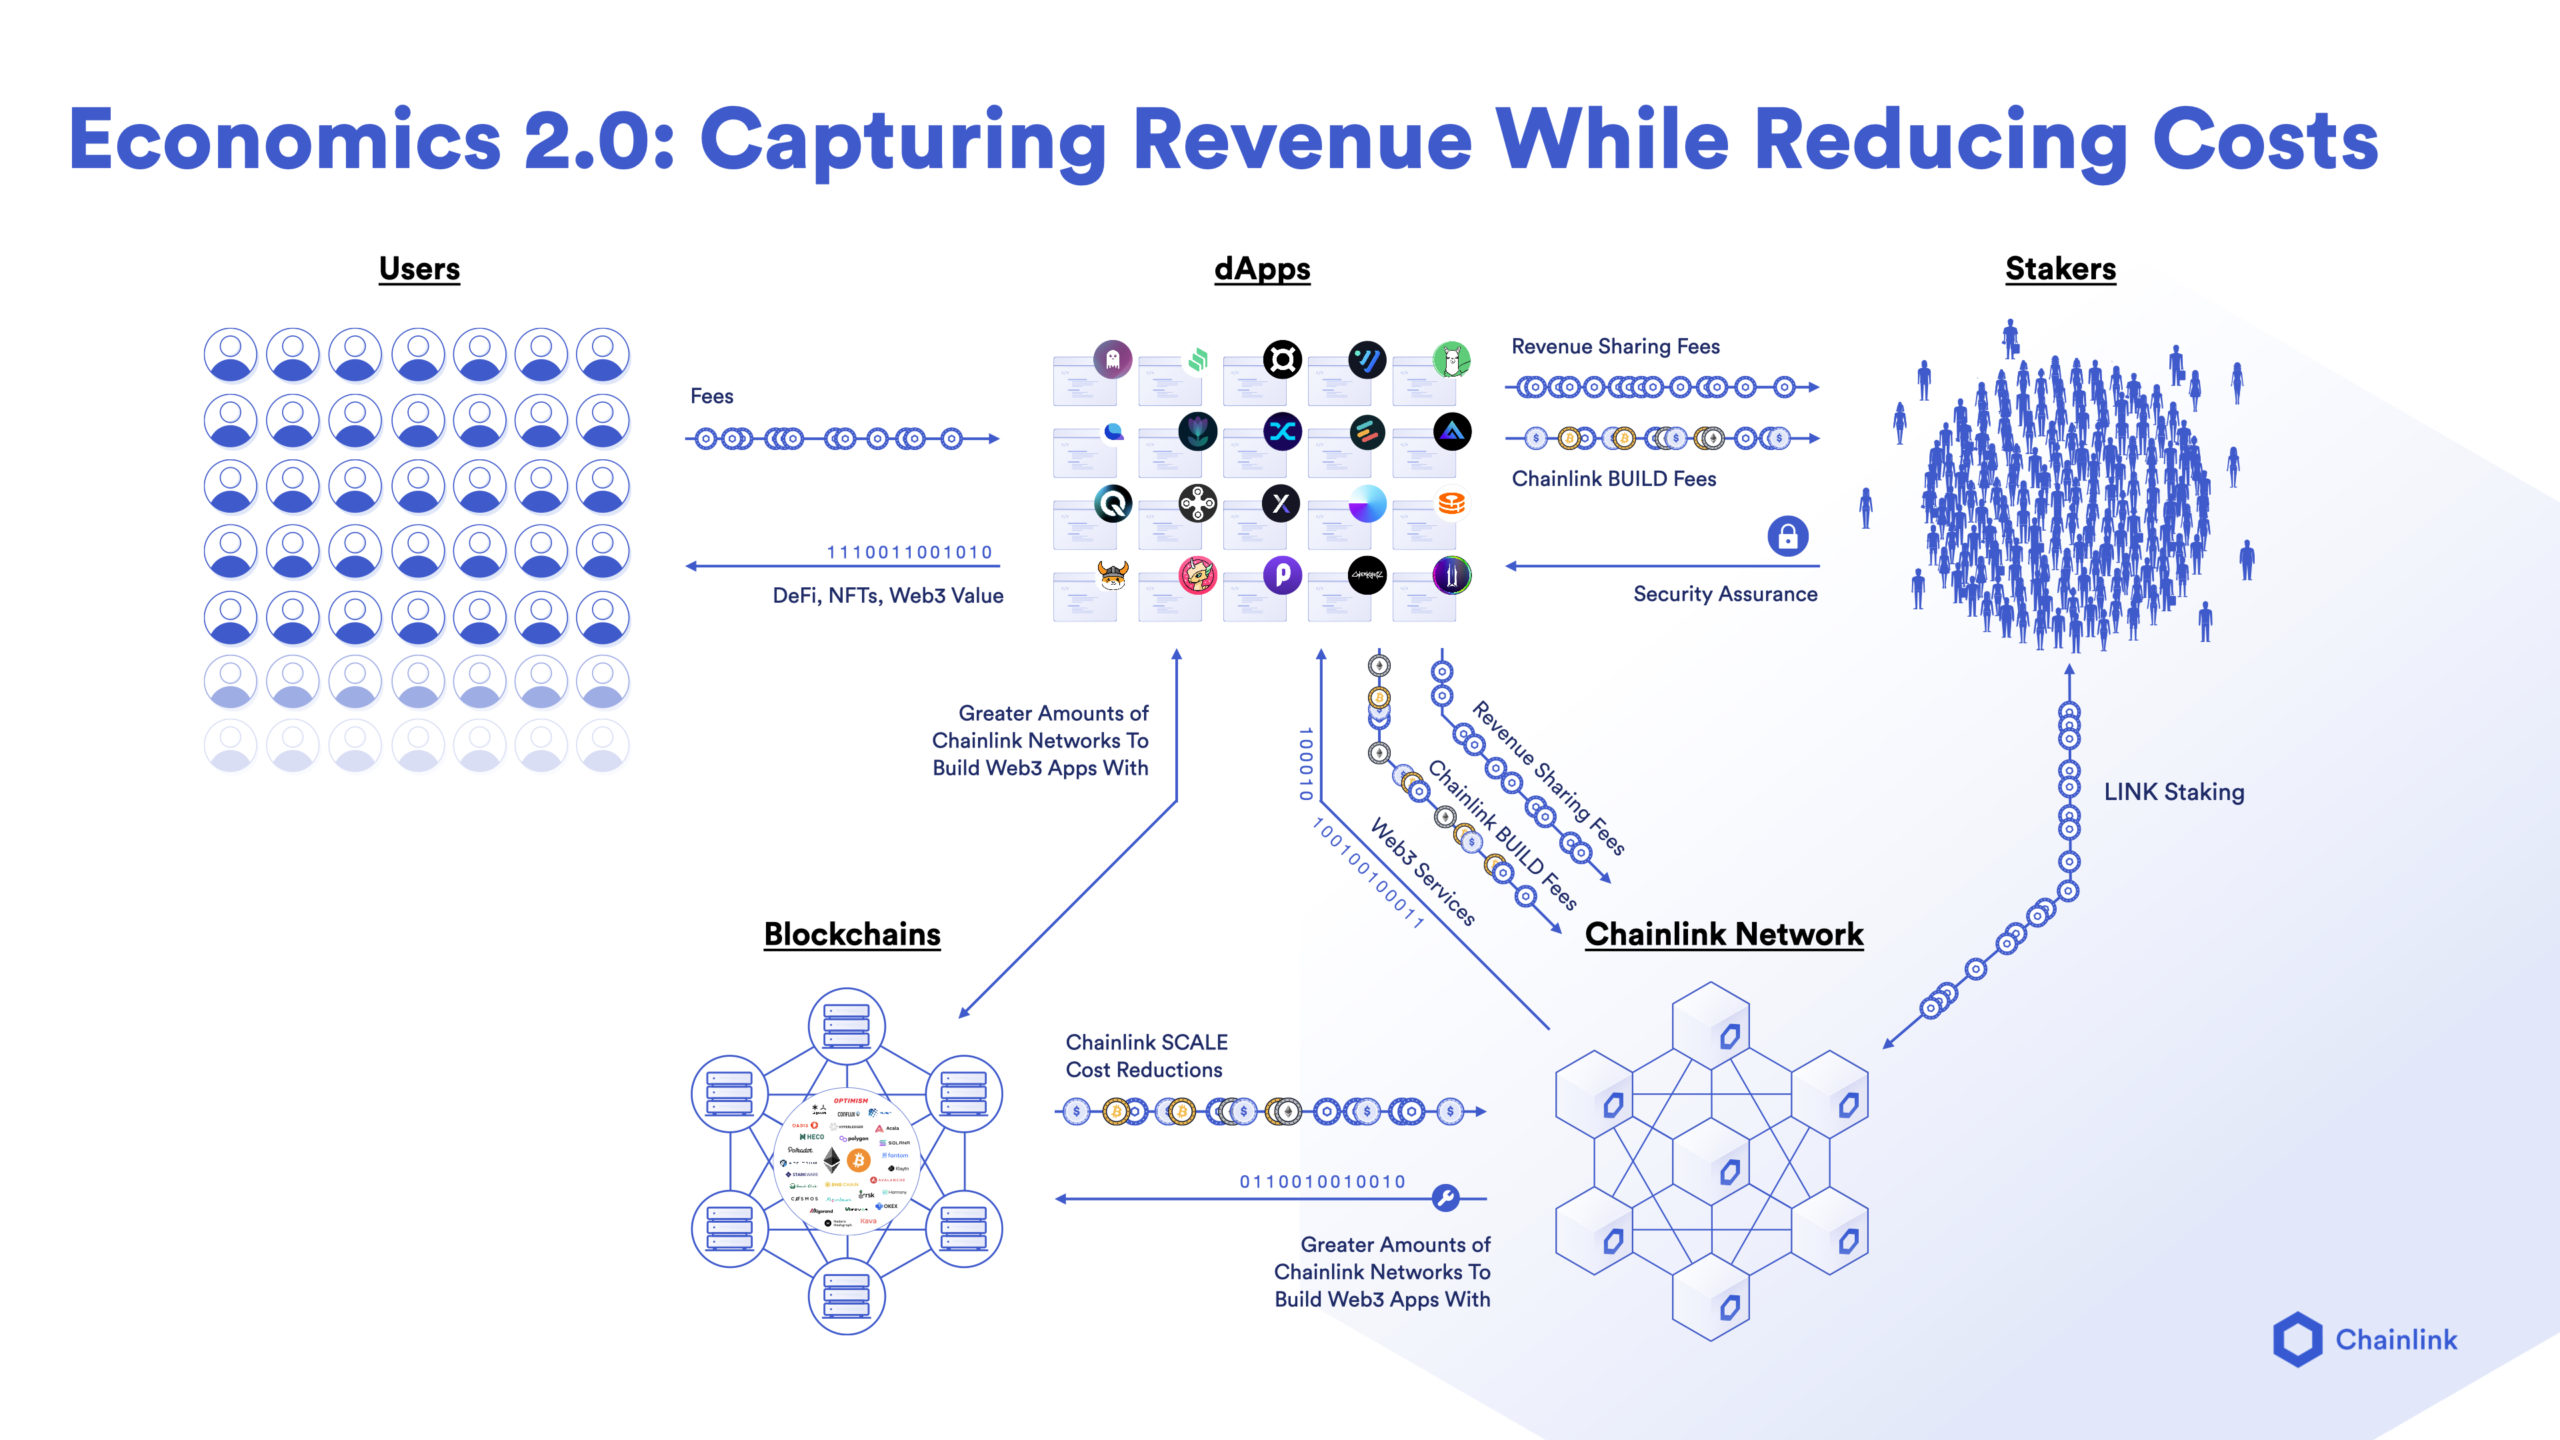 ecobt.ru Guide: Delegated Liquid Staking Protocol for the Chainlink Ecosystem